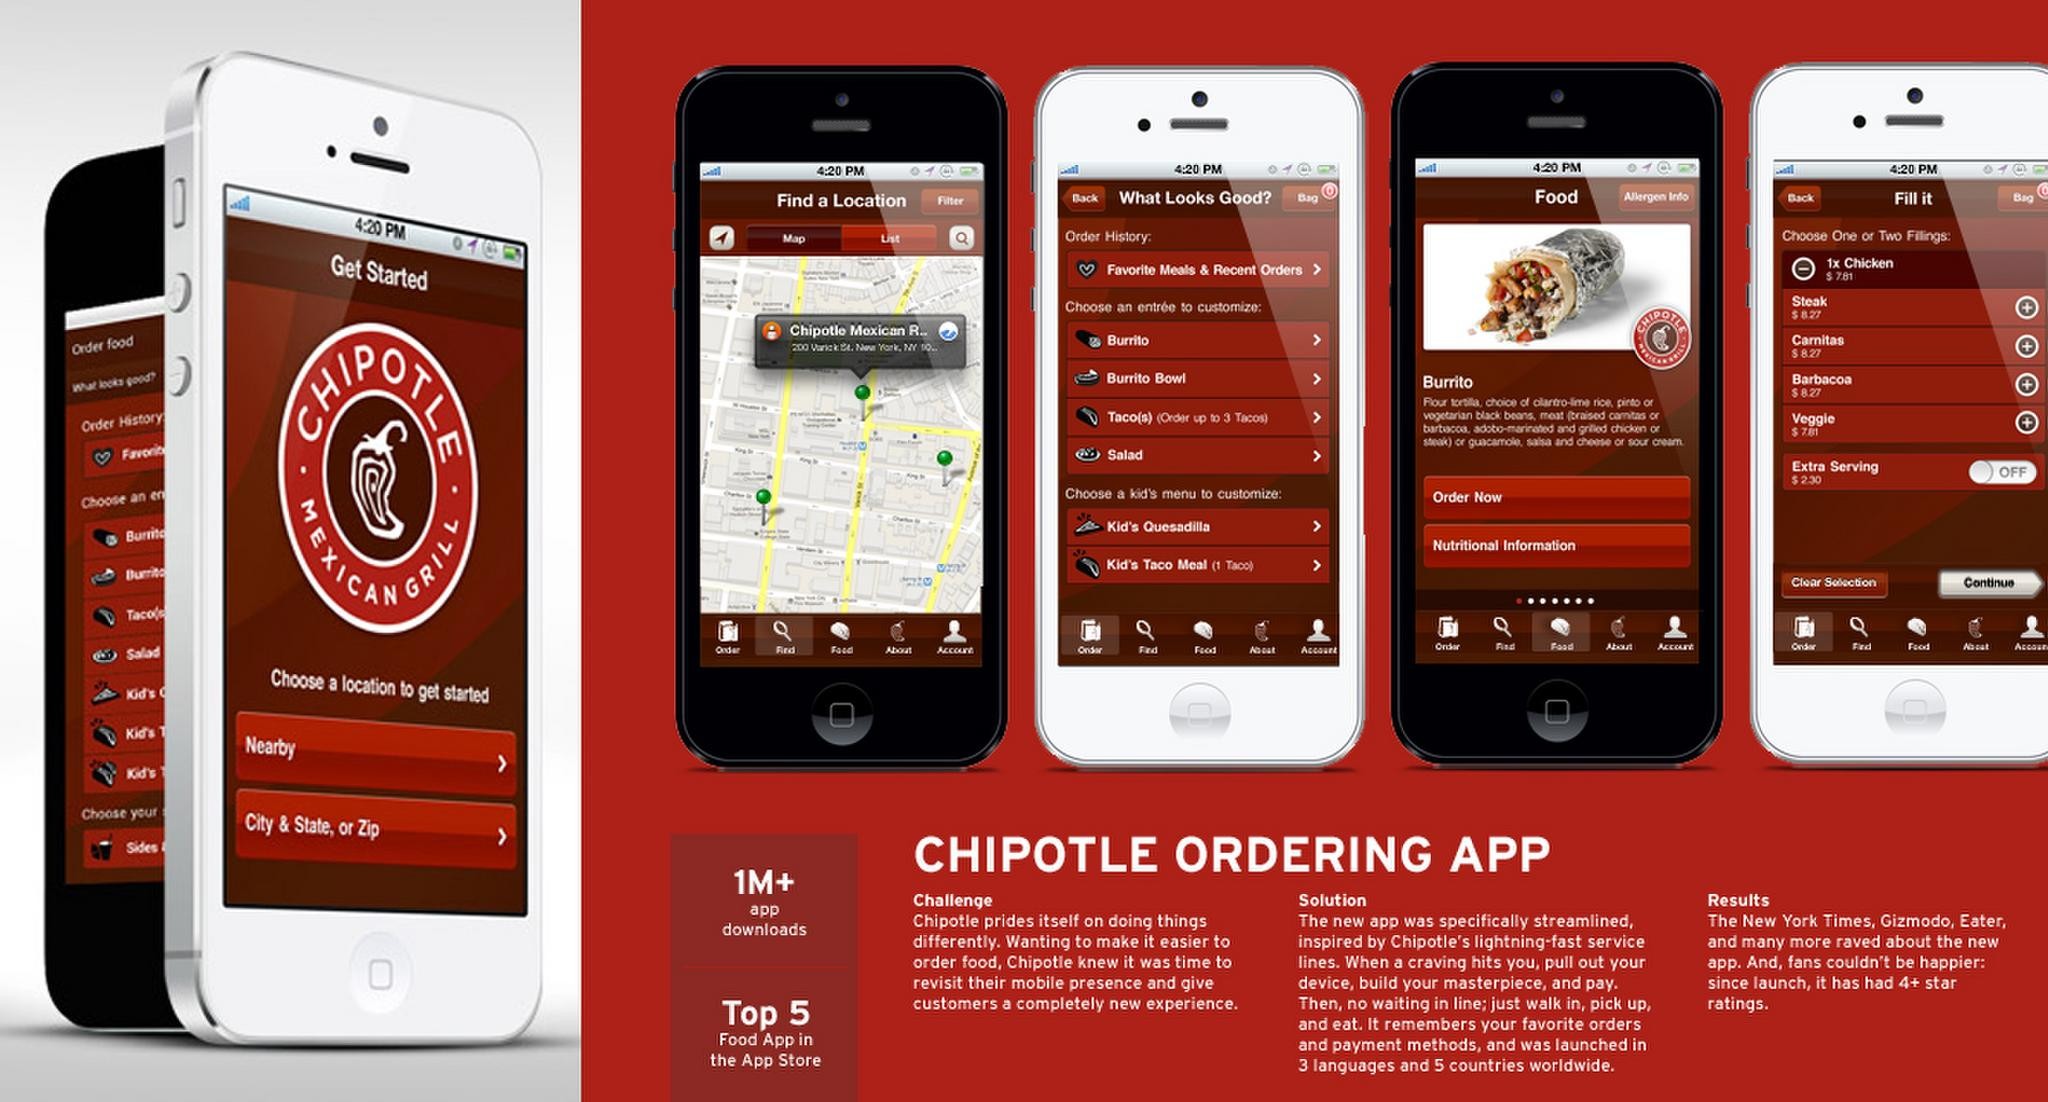 CHIPOTLE ORDERING APP